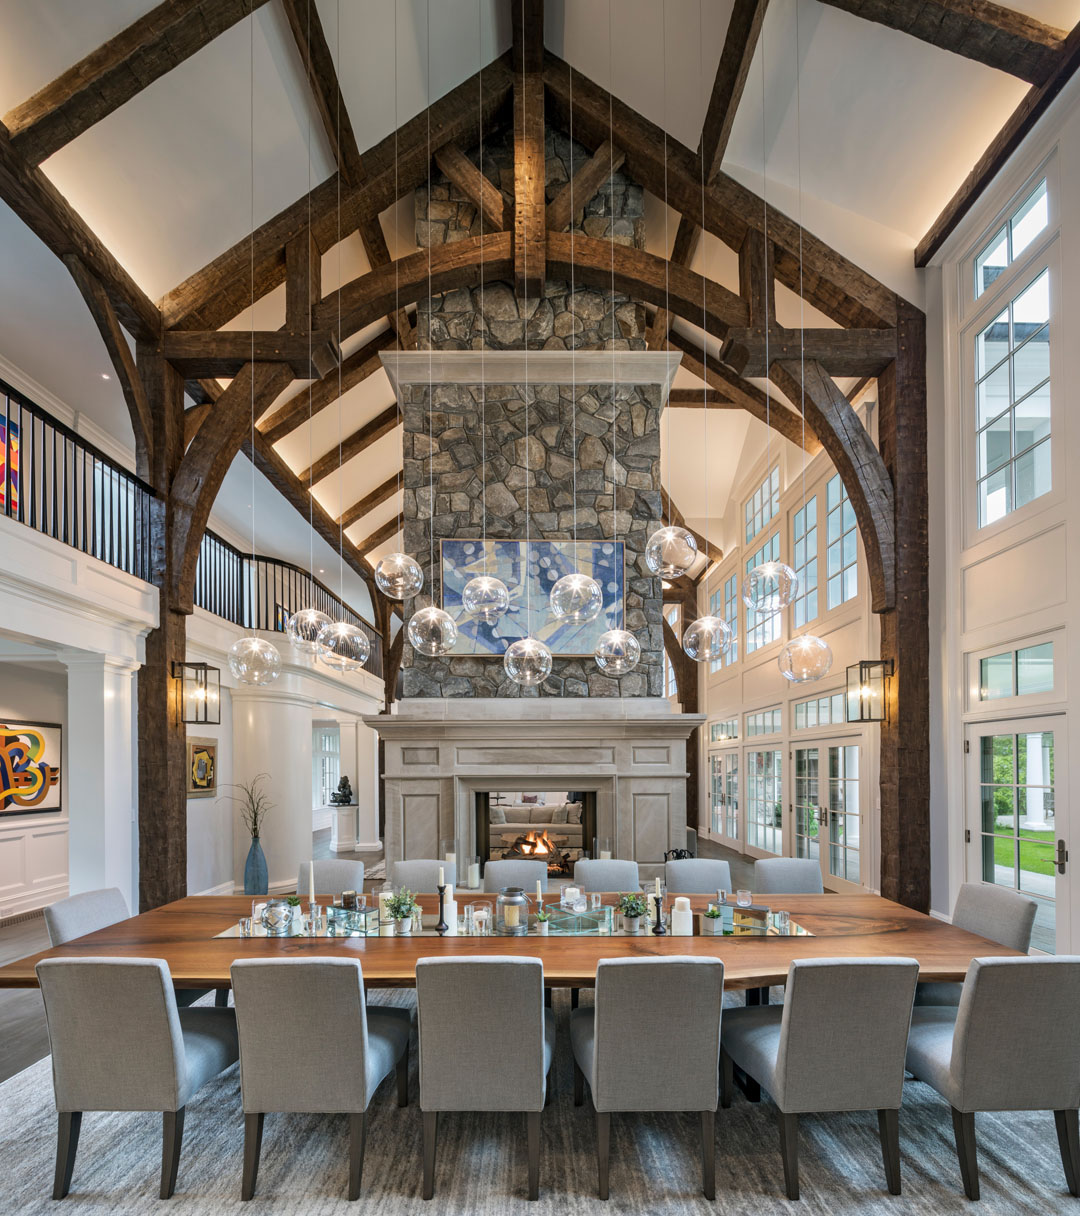 Grand Living Hall with Timber Frame Roof Beams